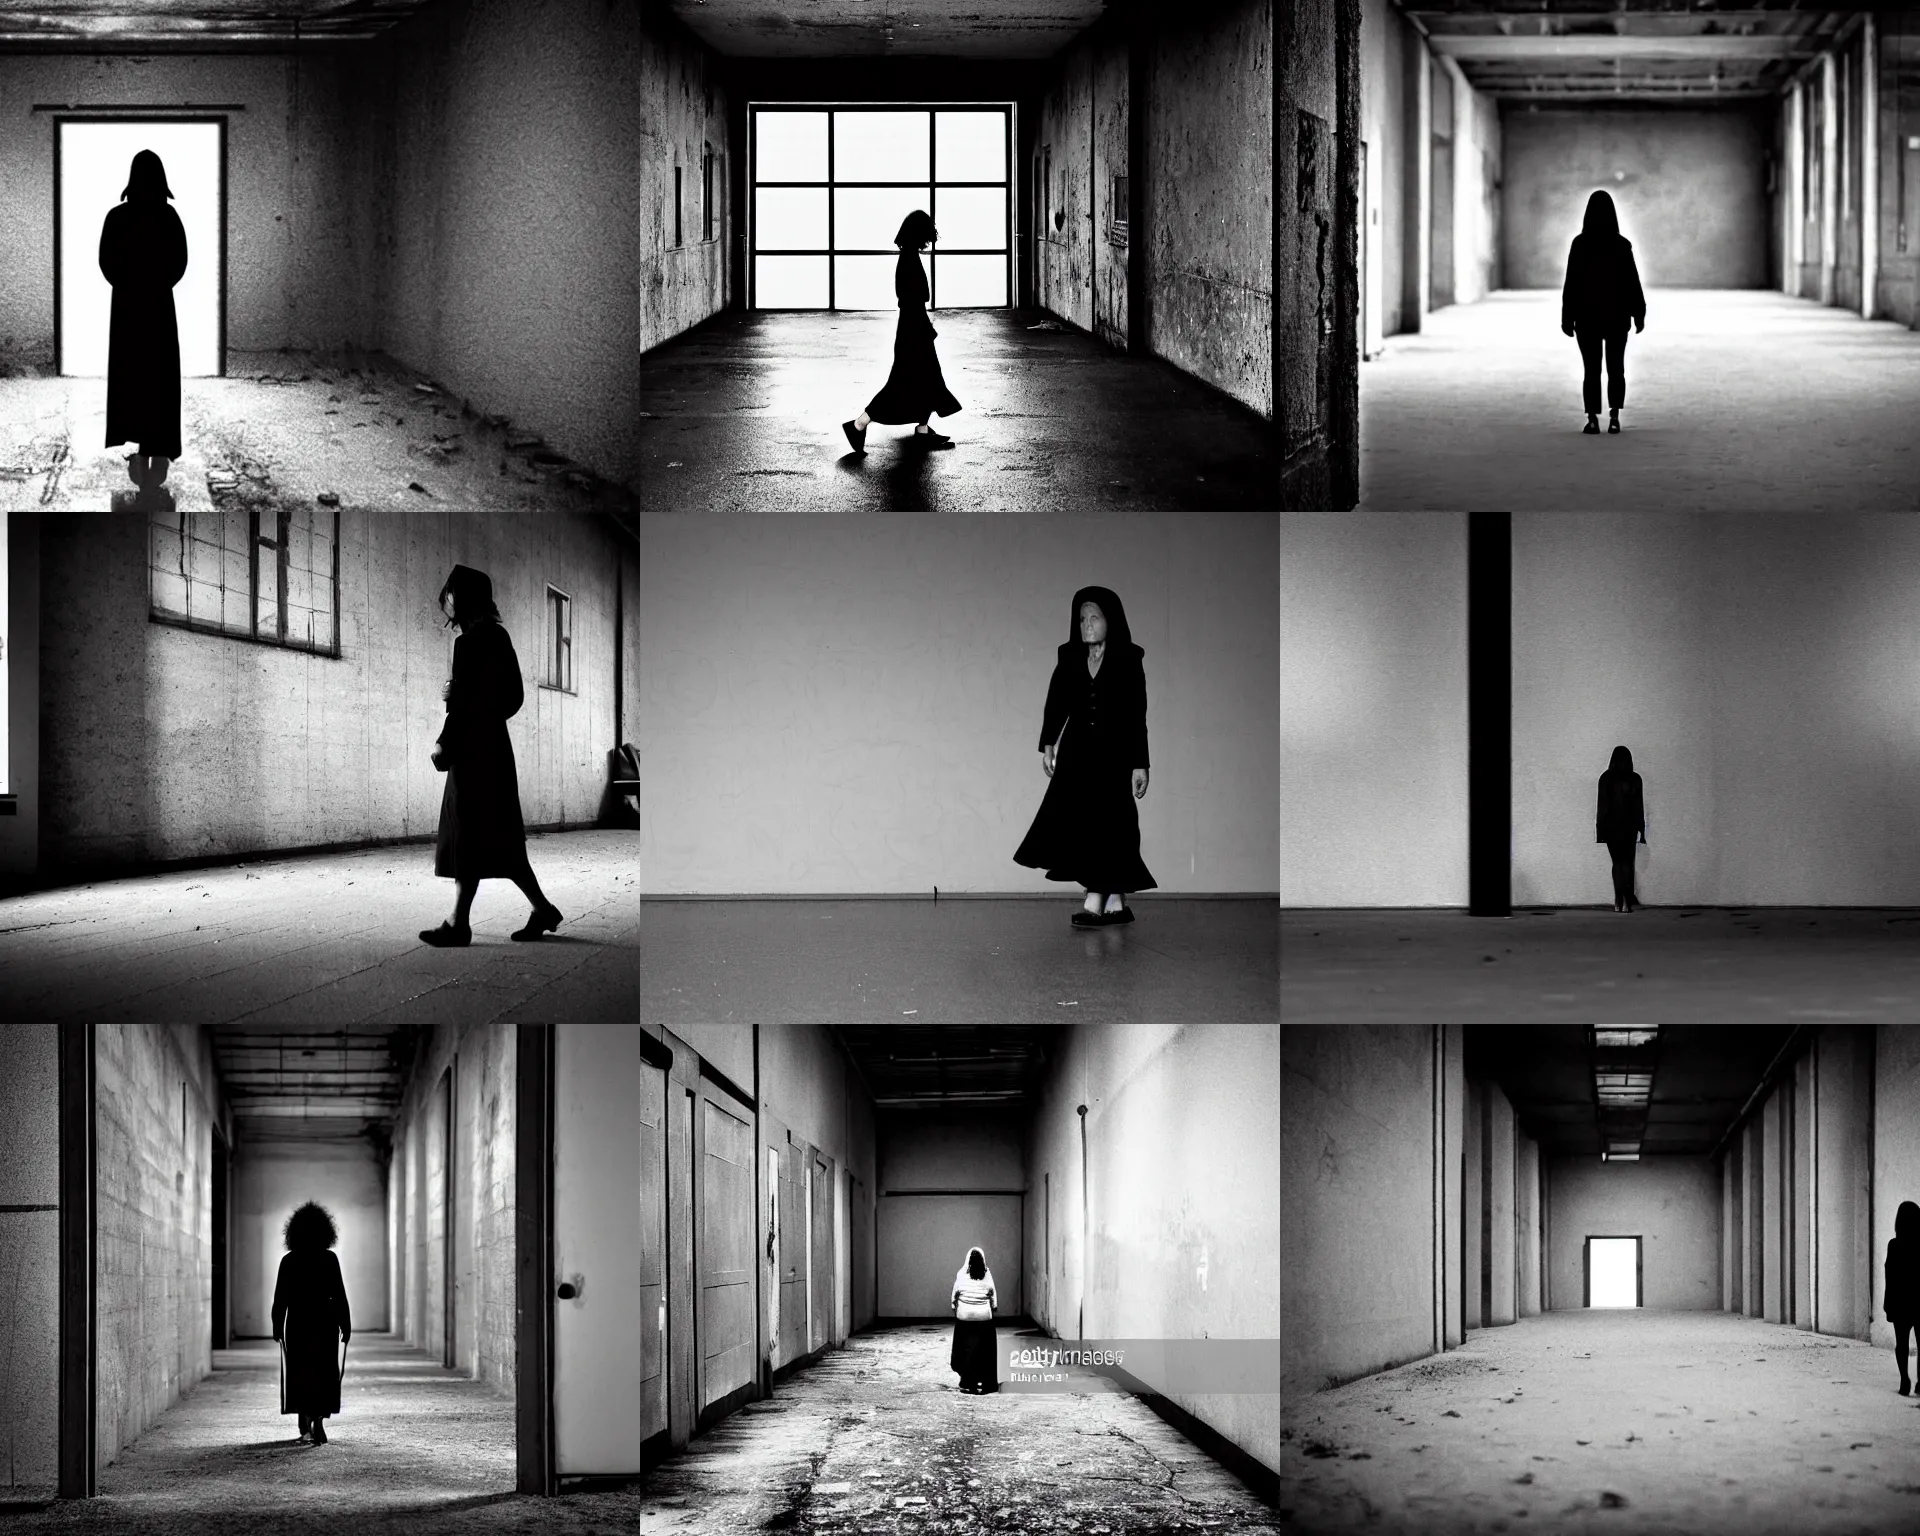 Prompt: Woman walking alone in solitude. The woman is just walking alone through the dark. The woman is alone and waiting for the end of the world. a woman in solitude and contemplation The man is alone in this empty room. The woman is solitary and waiting for godot The solitary woman with the empty cabinet is a reflection of the isolation of man A long abandoned industrial film studio hidden in the depths of an old rural building I'm looking for my first ektachrome film. I think this is a house to make Velvia prints in. The only way to get this film underground is with a camera and a little imagination. A look at the underground film, made of recycled Kodak film. The abandoned Kodak Velvia camera is a reminder of the early stages of film technology.